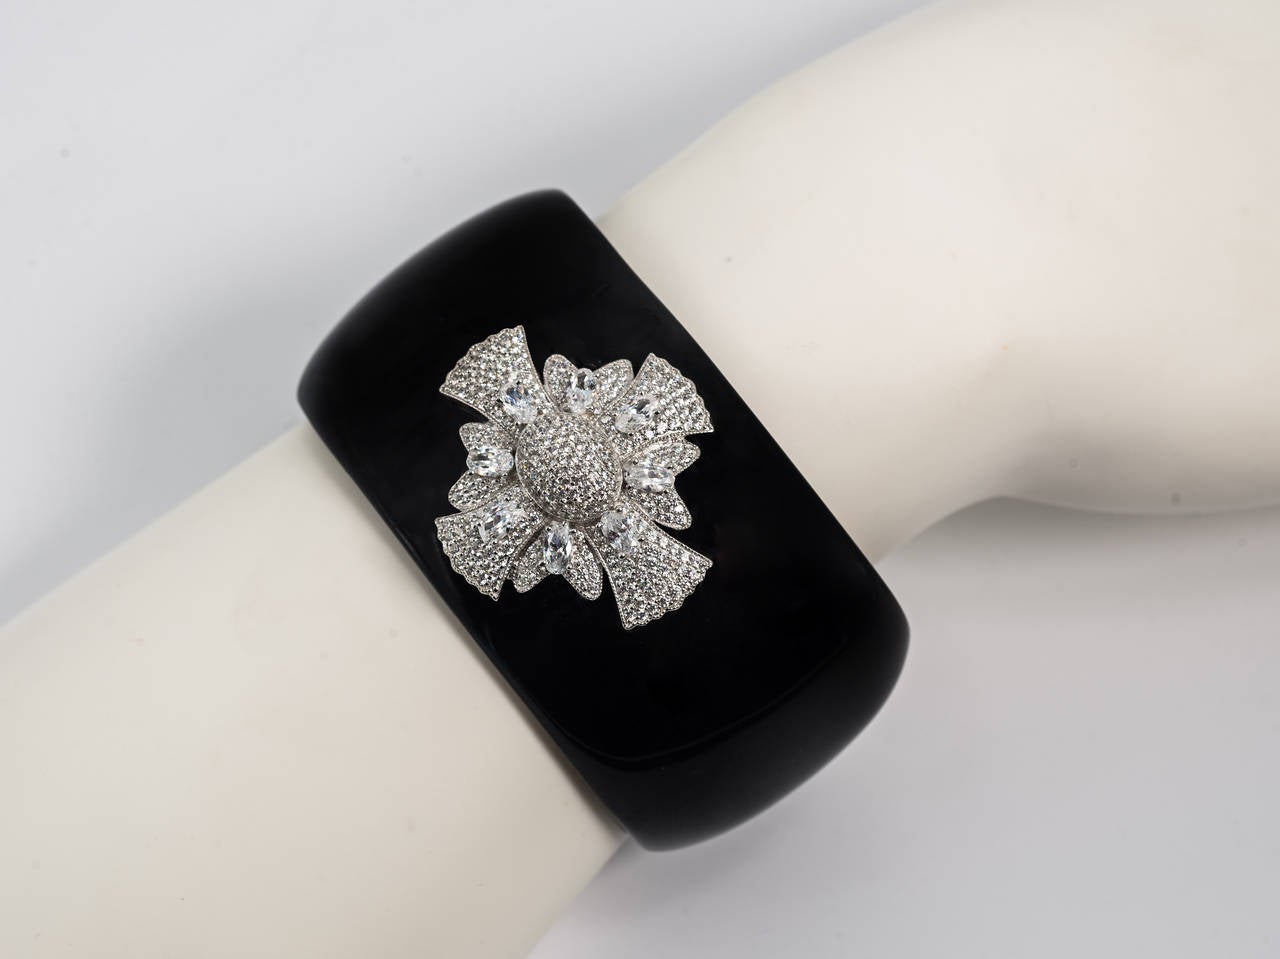 Pave faux diamond cubic zircon set sterling Maltese Cross real black onyx bangle cuff so very much in style to-day. A classic first designed by Verdura for Chanel and yet once more enjoying a revival. 

Exclusive and very chic.

The bangle is